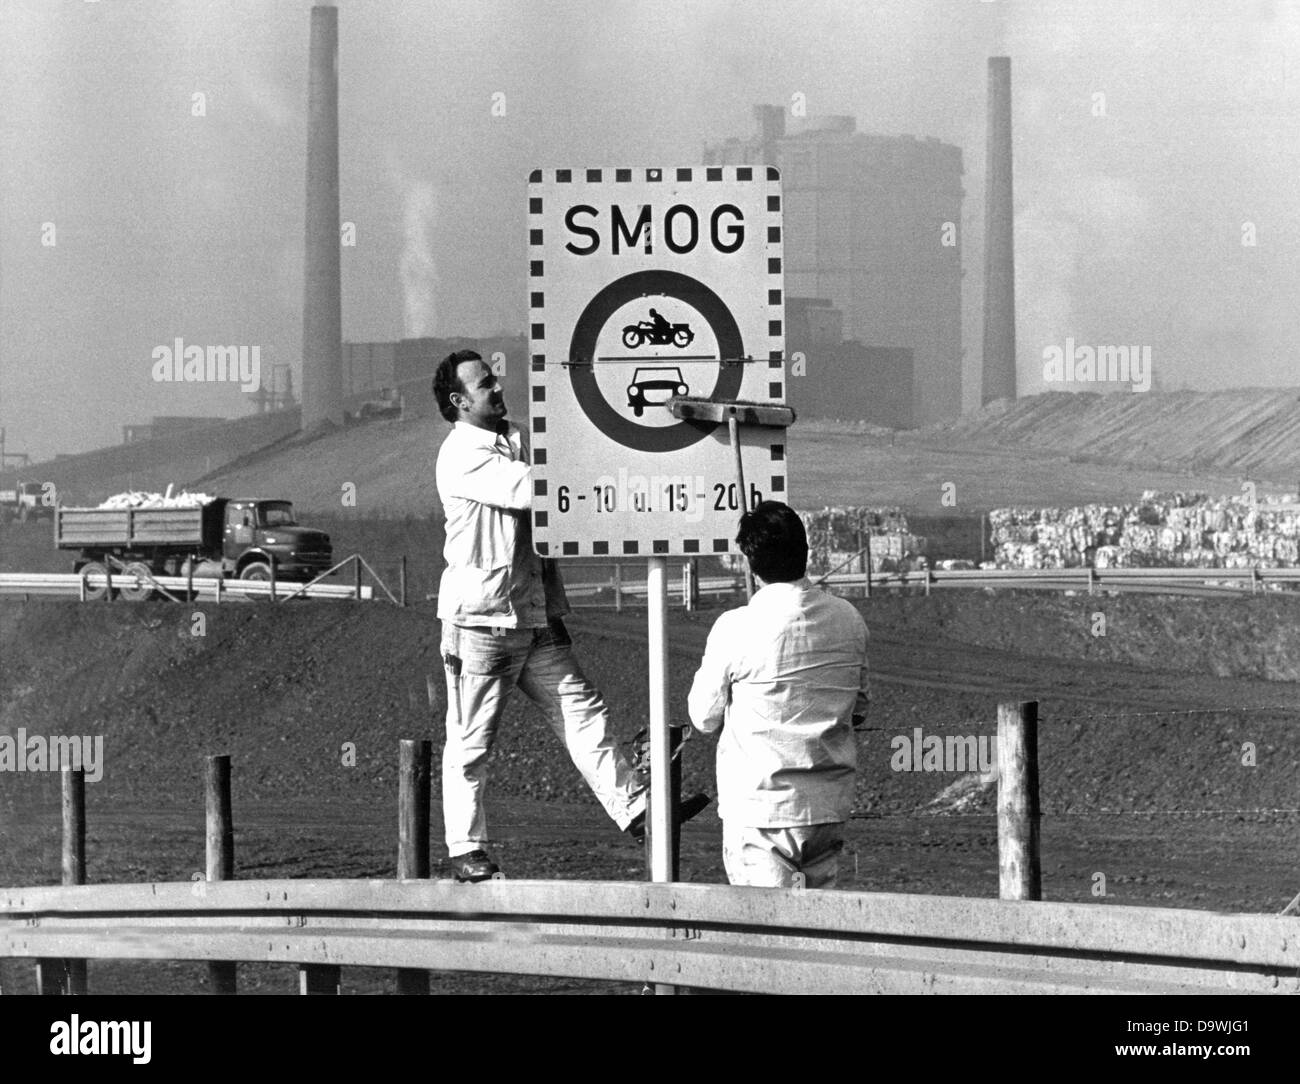 Two workers clean a smog sign in Dortmund in front of an industrial scenery on the 29th of October in 1975. In case that the acceptable values will be exceeded, drivers have to expect a driving ban. Stock Photo